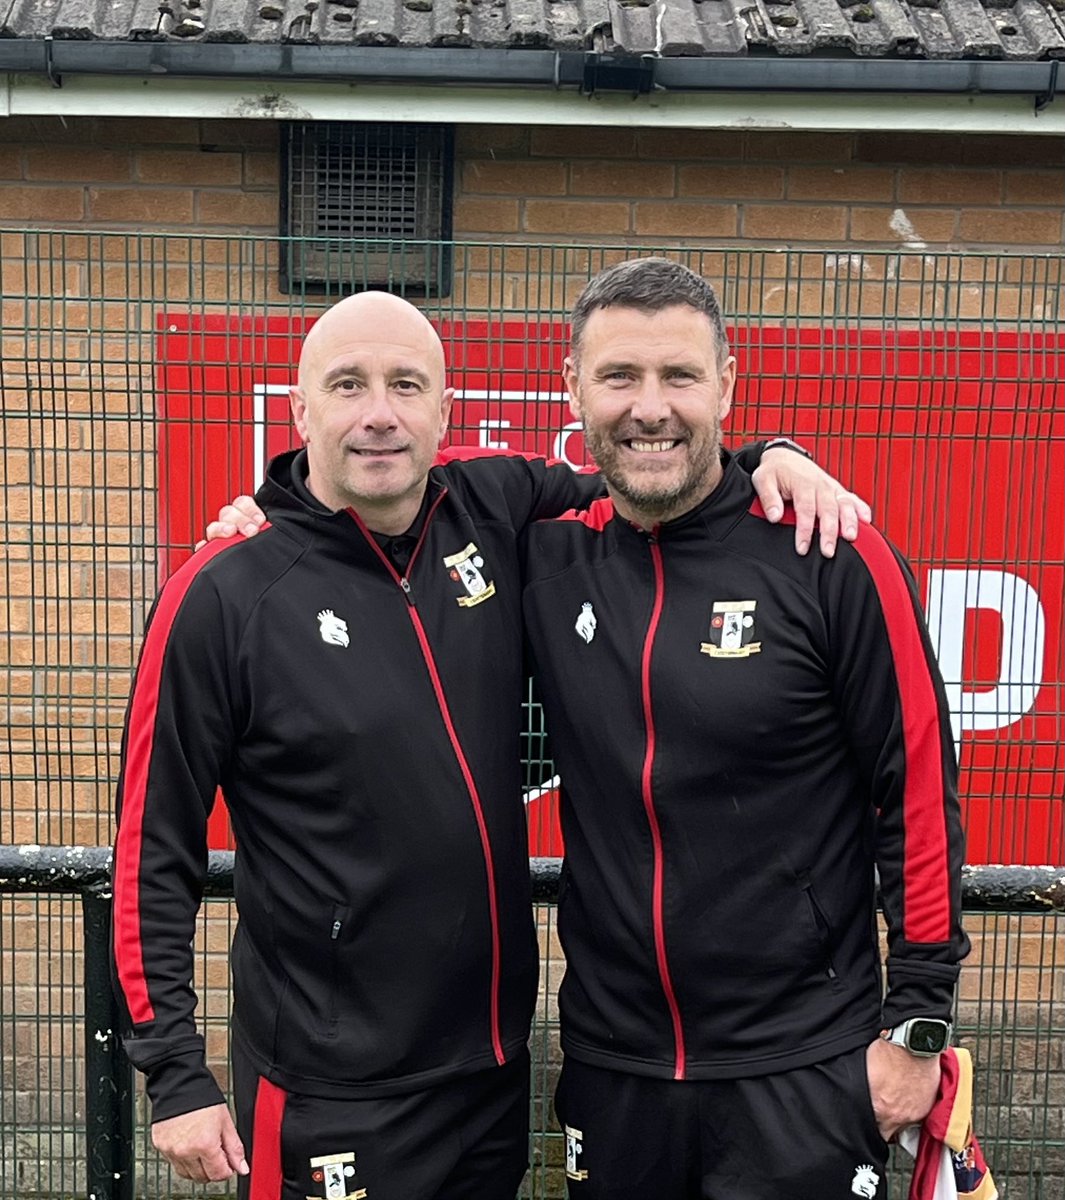 After last nights announcement regarding Matty and Jonah being asked to stand down with immediate effect, there will be 2 familiar faces in the dugout for our remaining 7 games. Chairman @lmcallis and Liam Boden will take the reins again to help in our relegation fight.